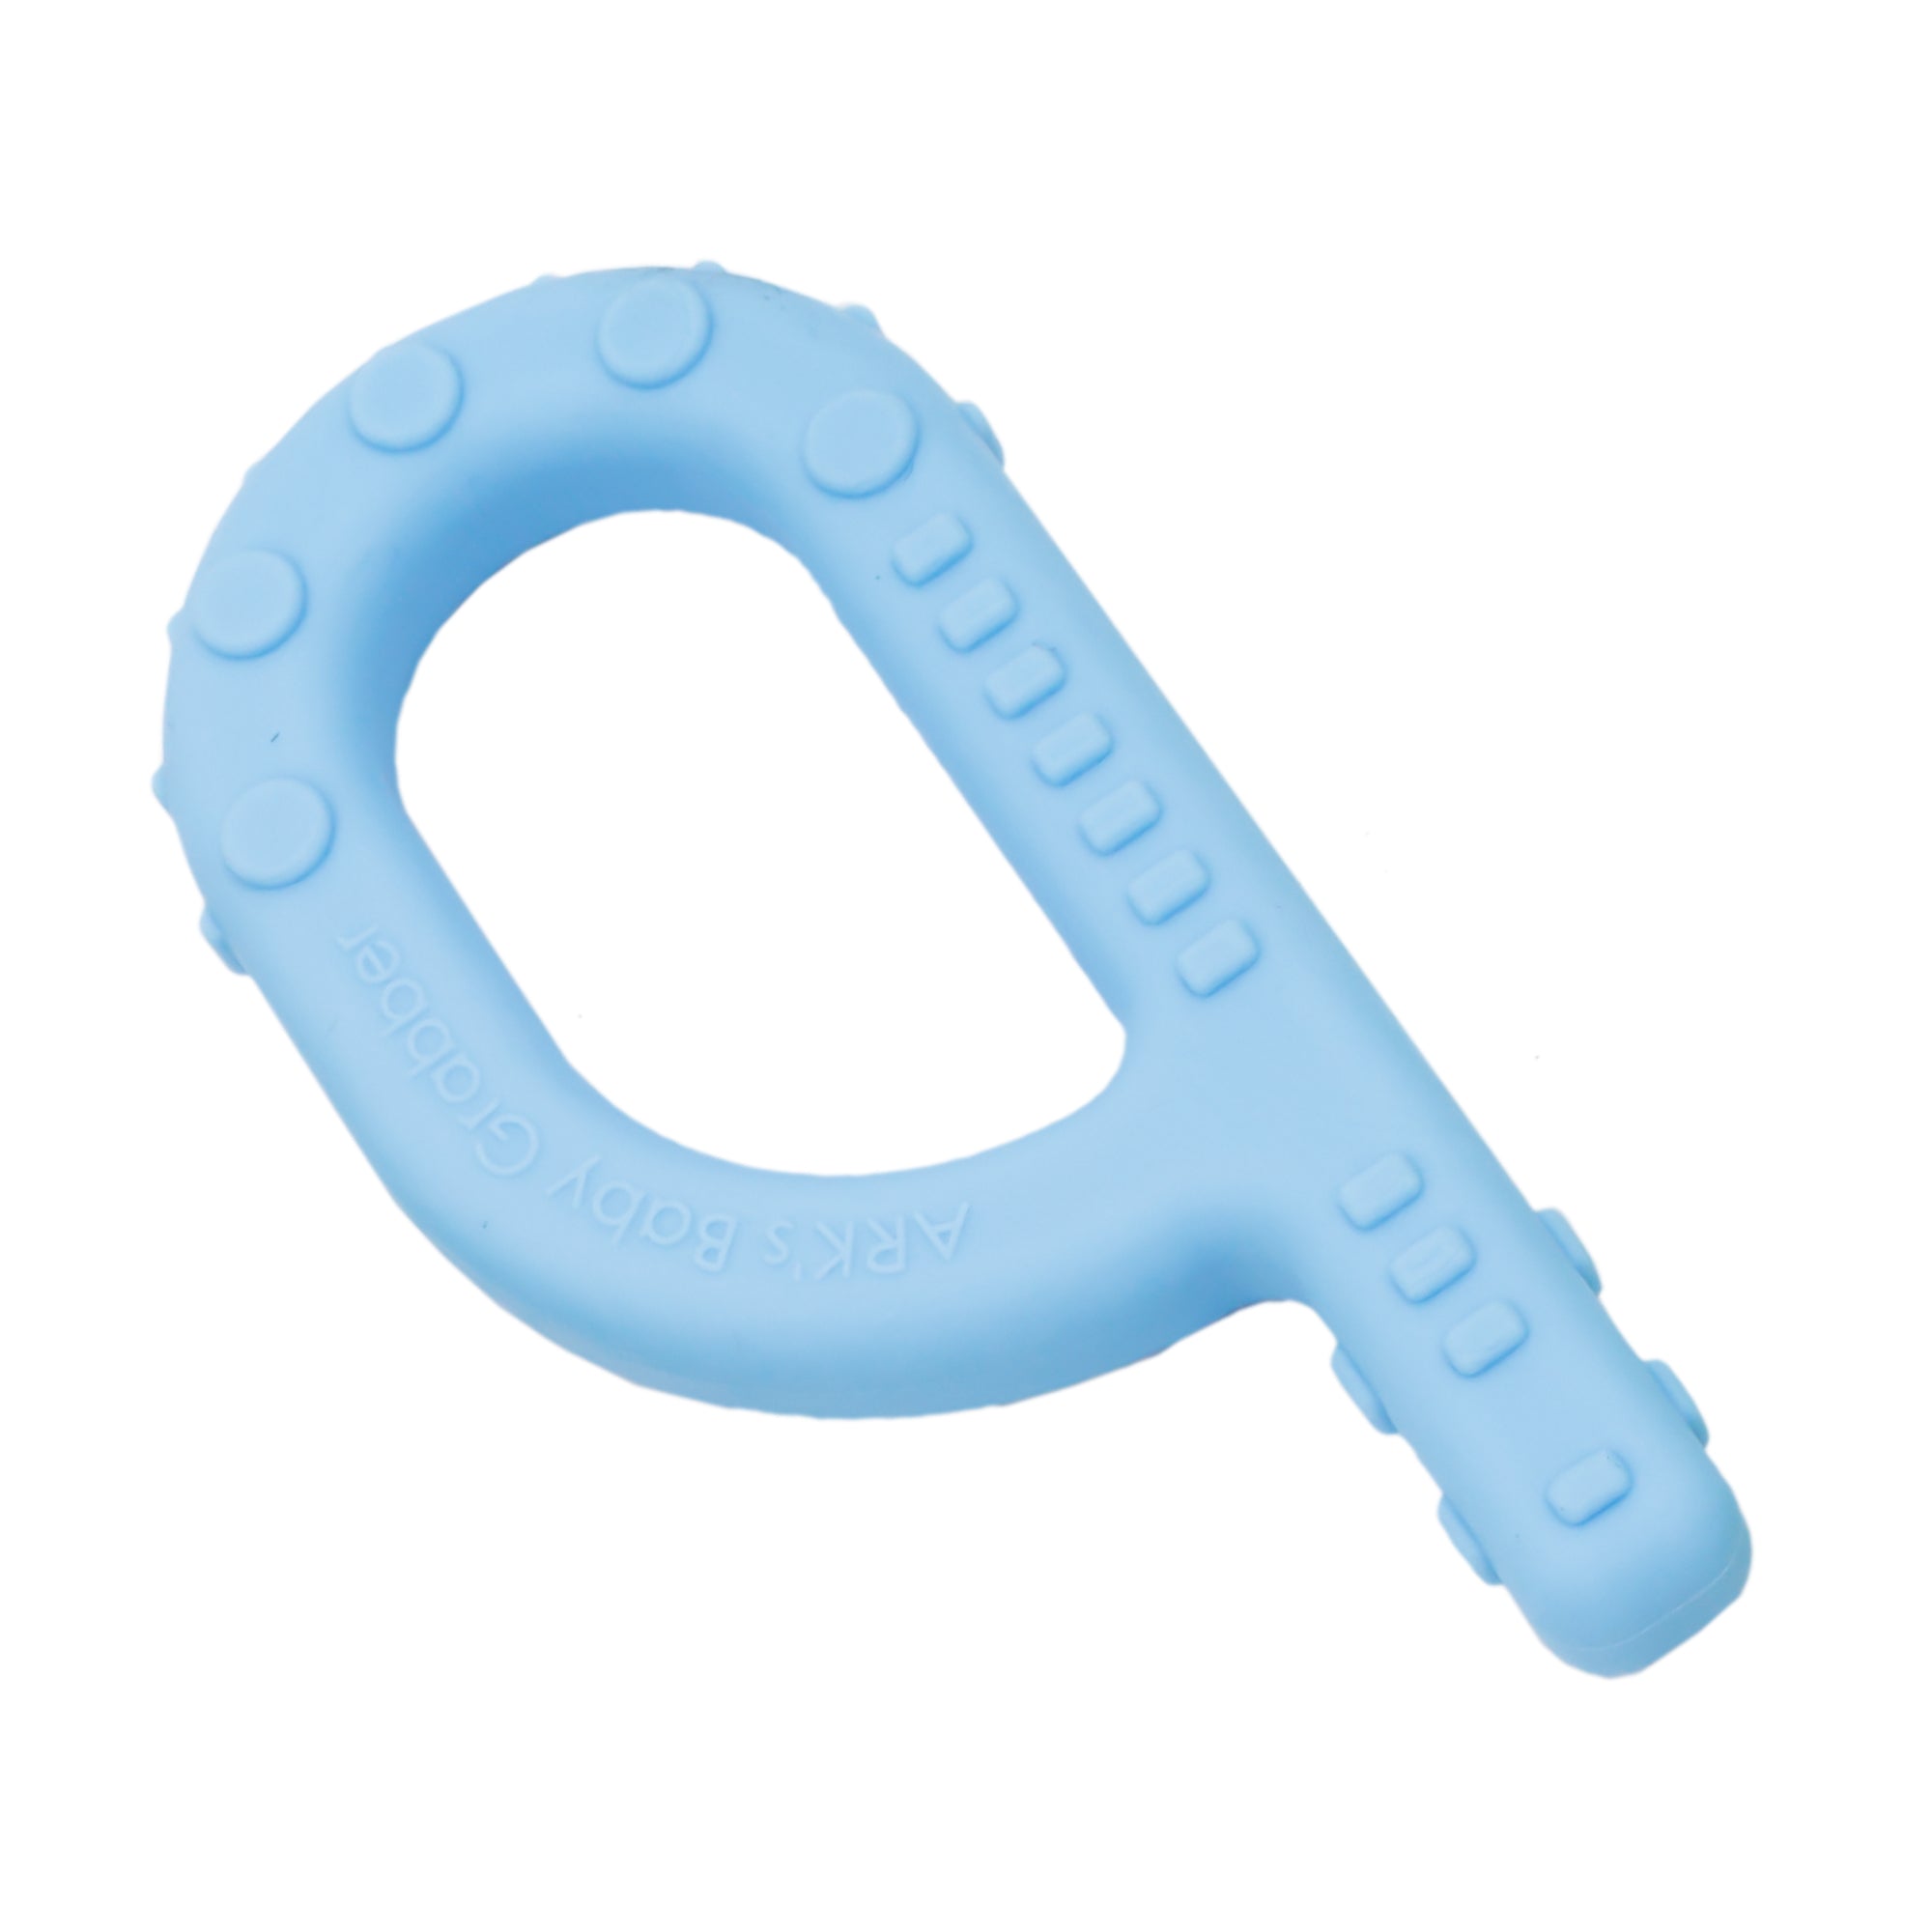 Light blue teether in the shape of a P with small round and rectangle nubs. Ark's baby grabber is embossed on the rounded piece.